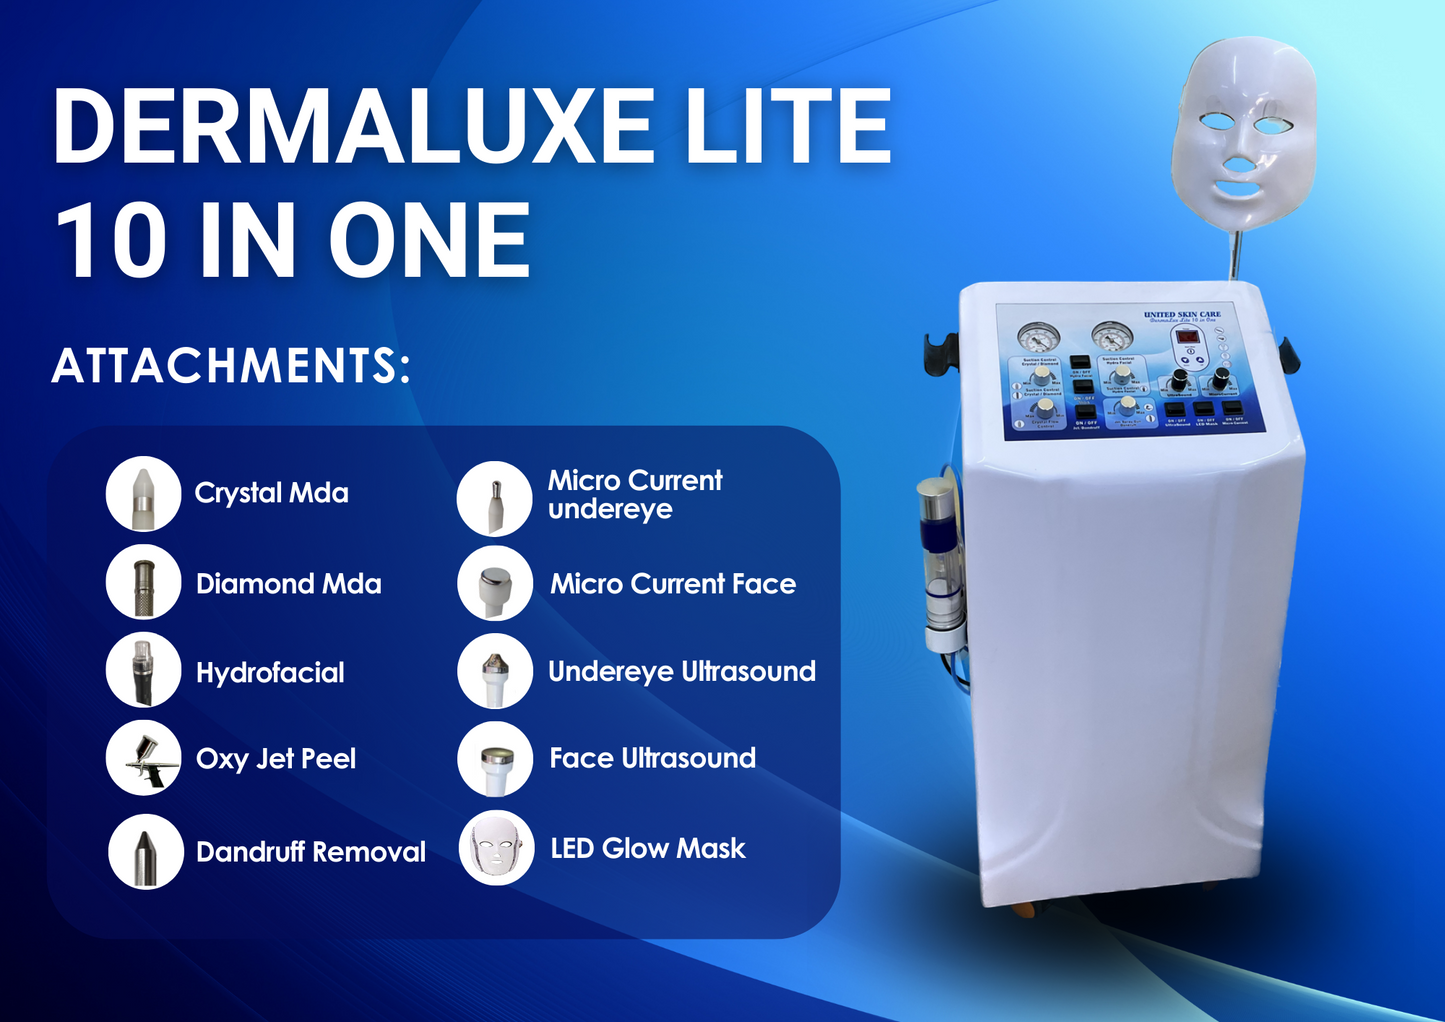 Dermaluxe Lite 10 in one | Complete Medifacial Solution | 3 years replacement guarantee | HydraFacial | Made In India